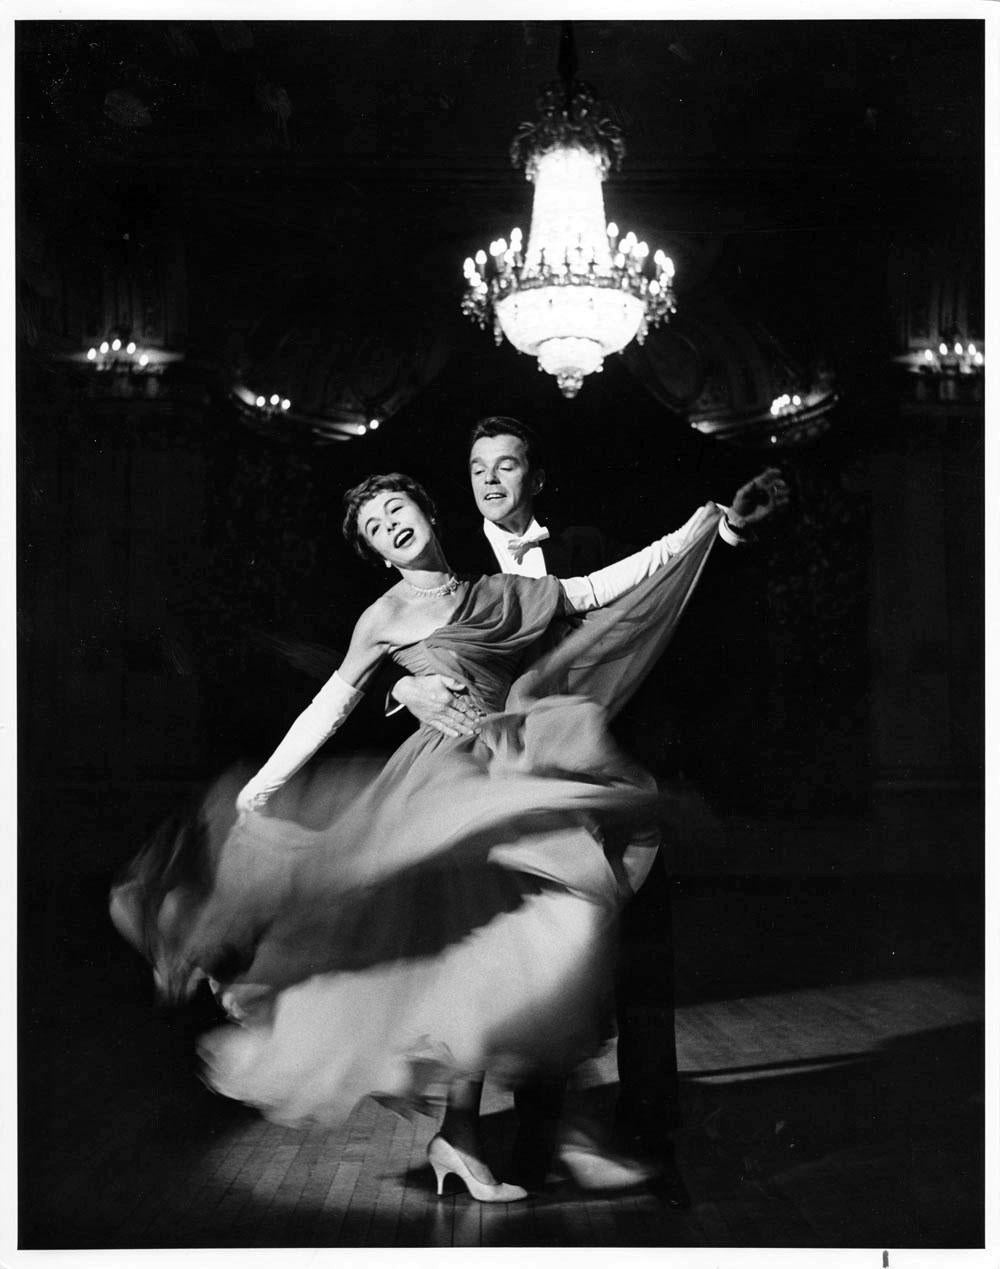 Jack Mitchell Black and White Photograph - Husband-and-wife dance team Marge and Gower Champion